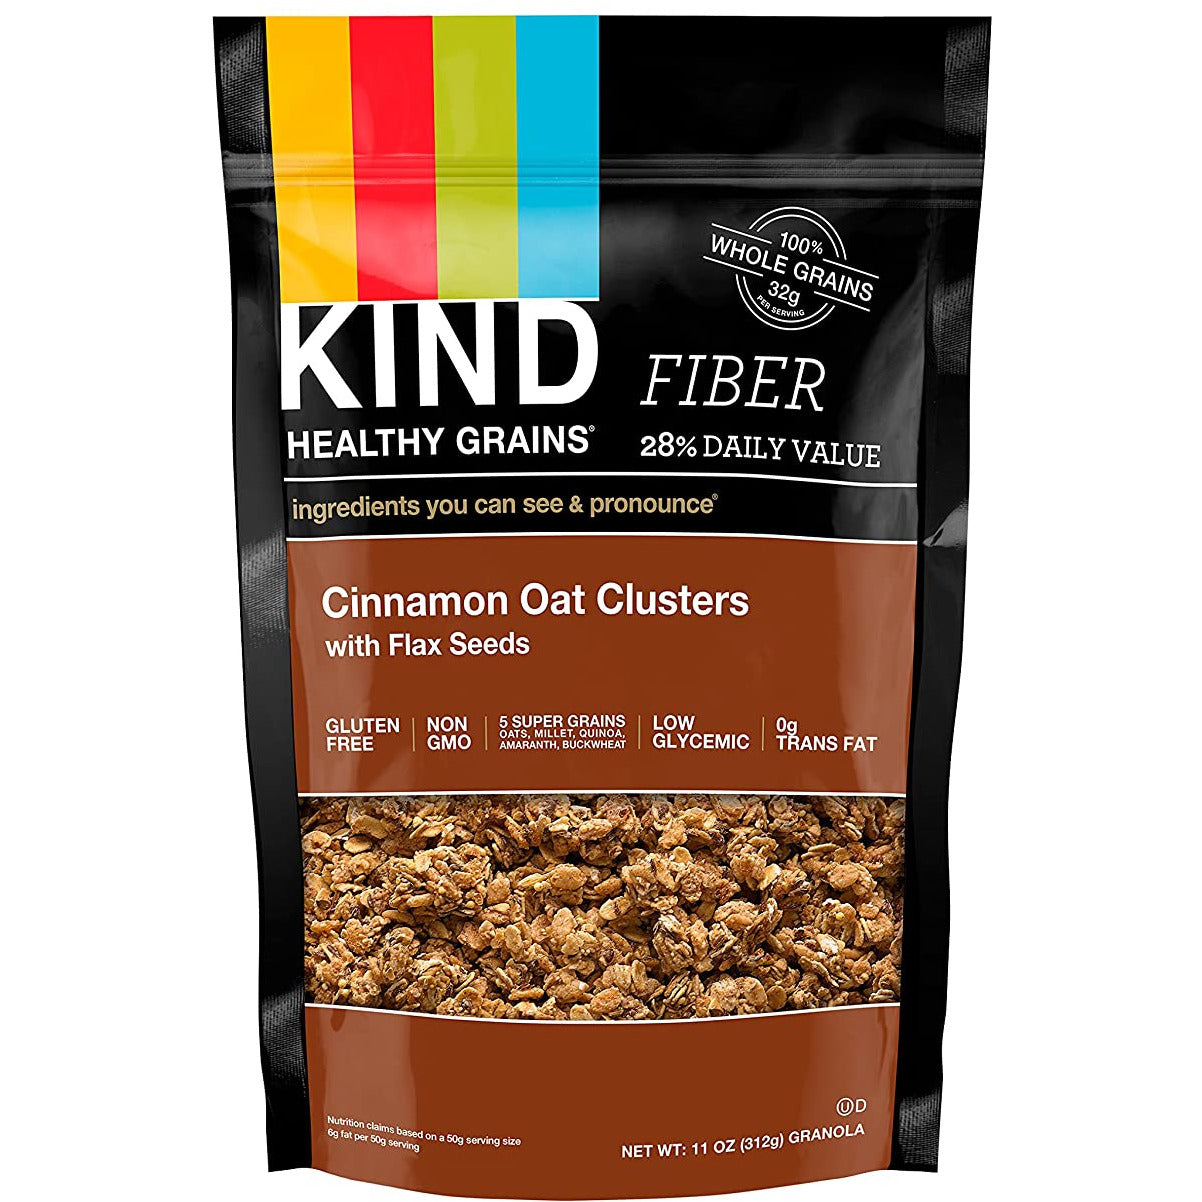 KIND Healthy Grains Clusters, Cinnamon Oat Clusters with Flax Seeds, Gluten Free, Non GMO, 11 Ounce Bag